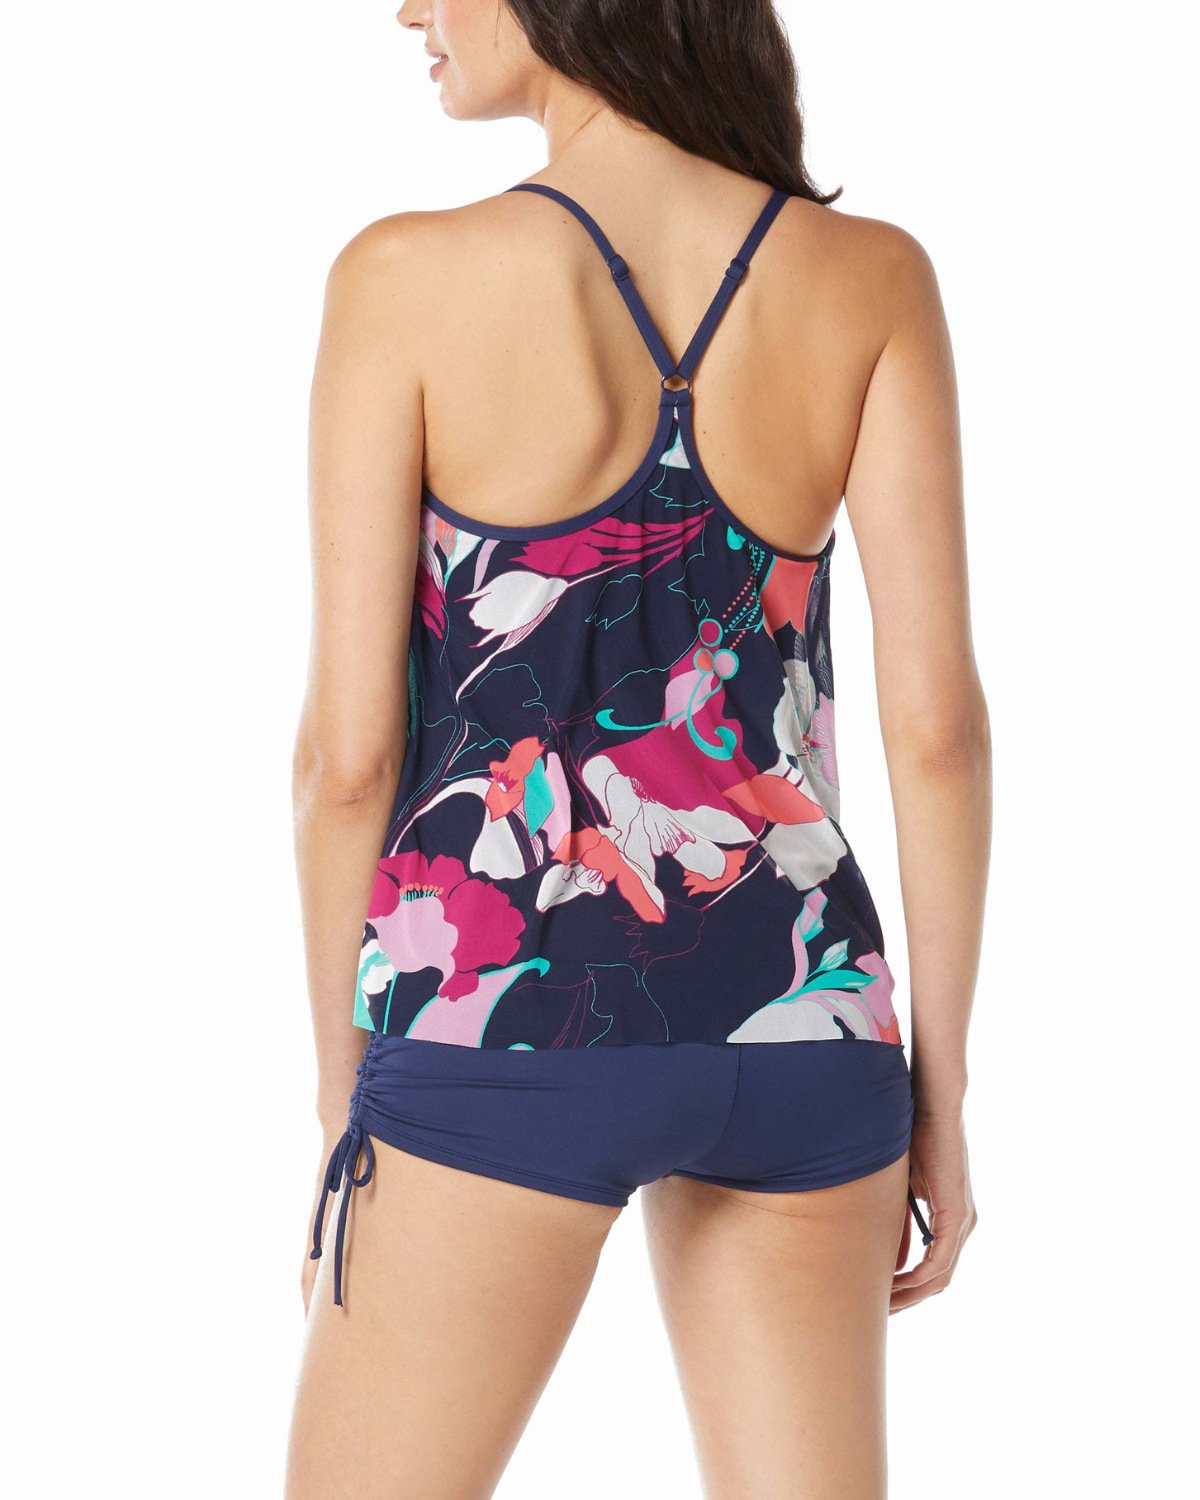 Model wearing a mesh layer tankini top in a navy, pink, orange, and blue abstract floral print